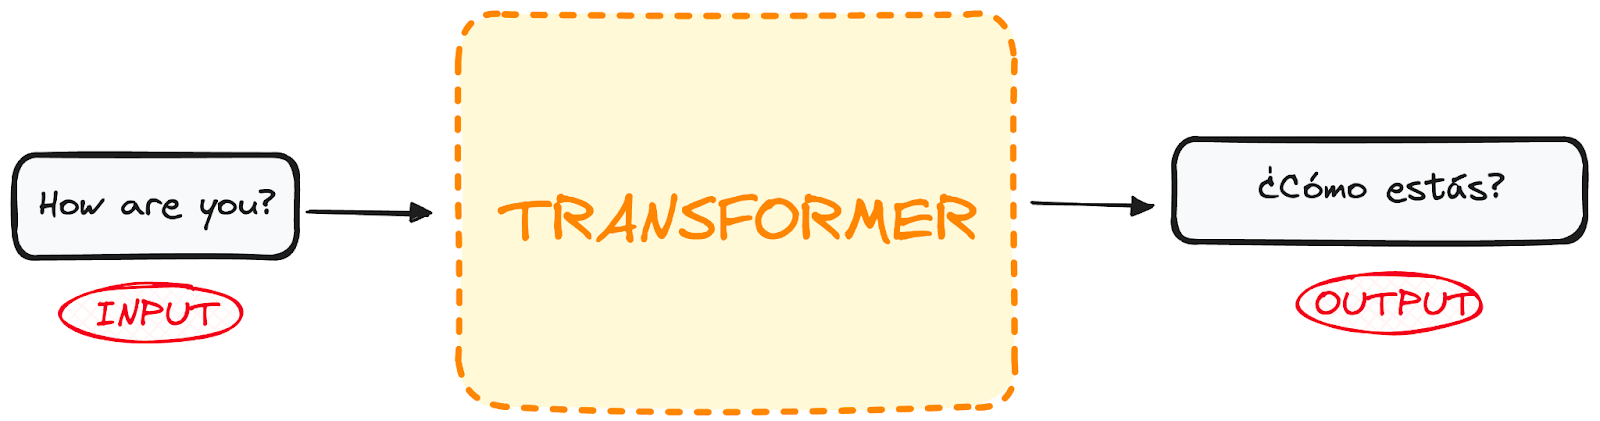 The transformer architecture for language translating as a black box that translates from english to spanish.